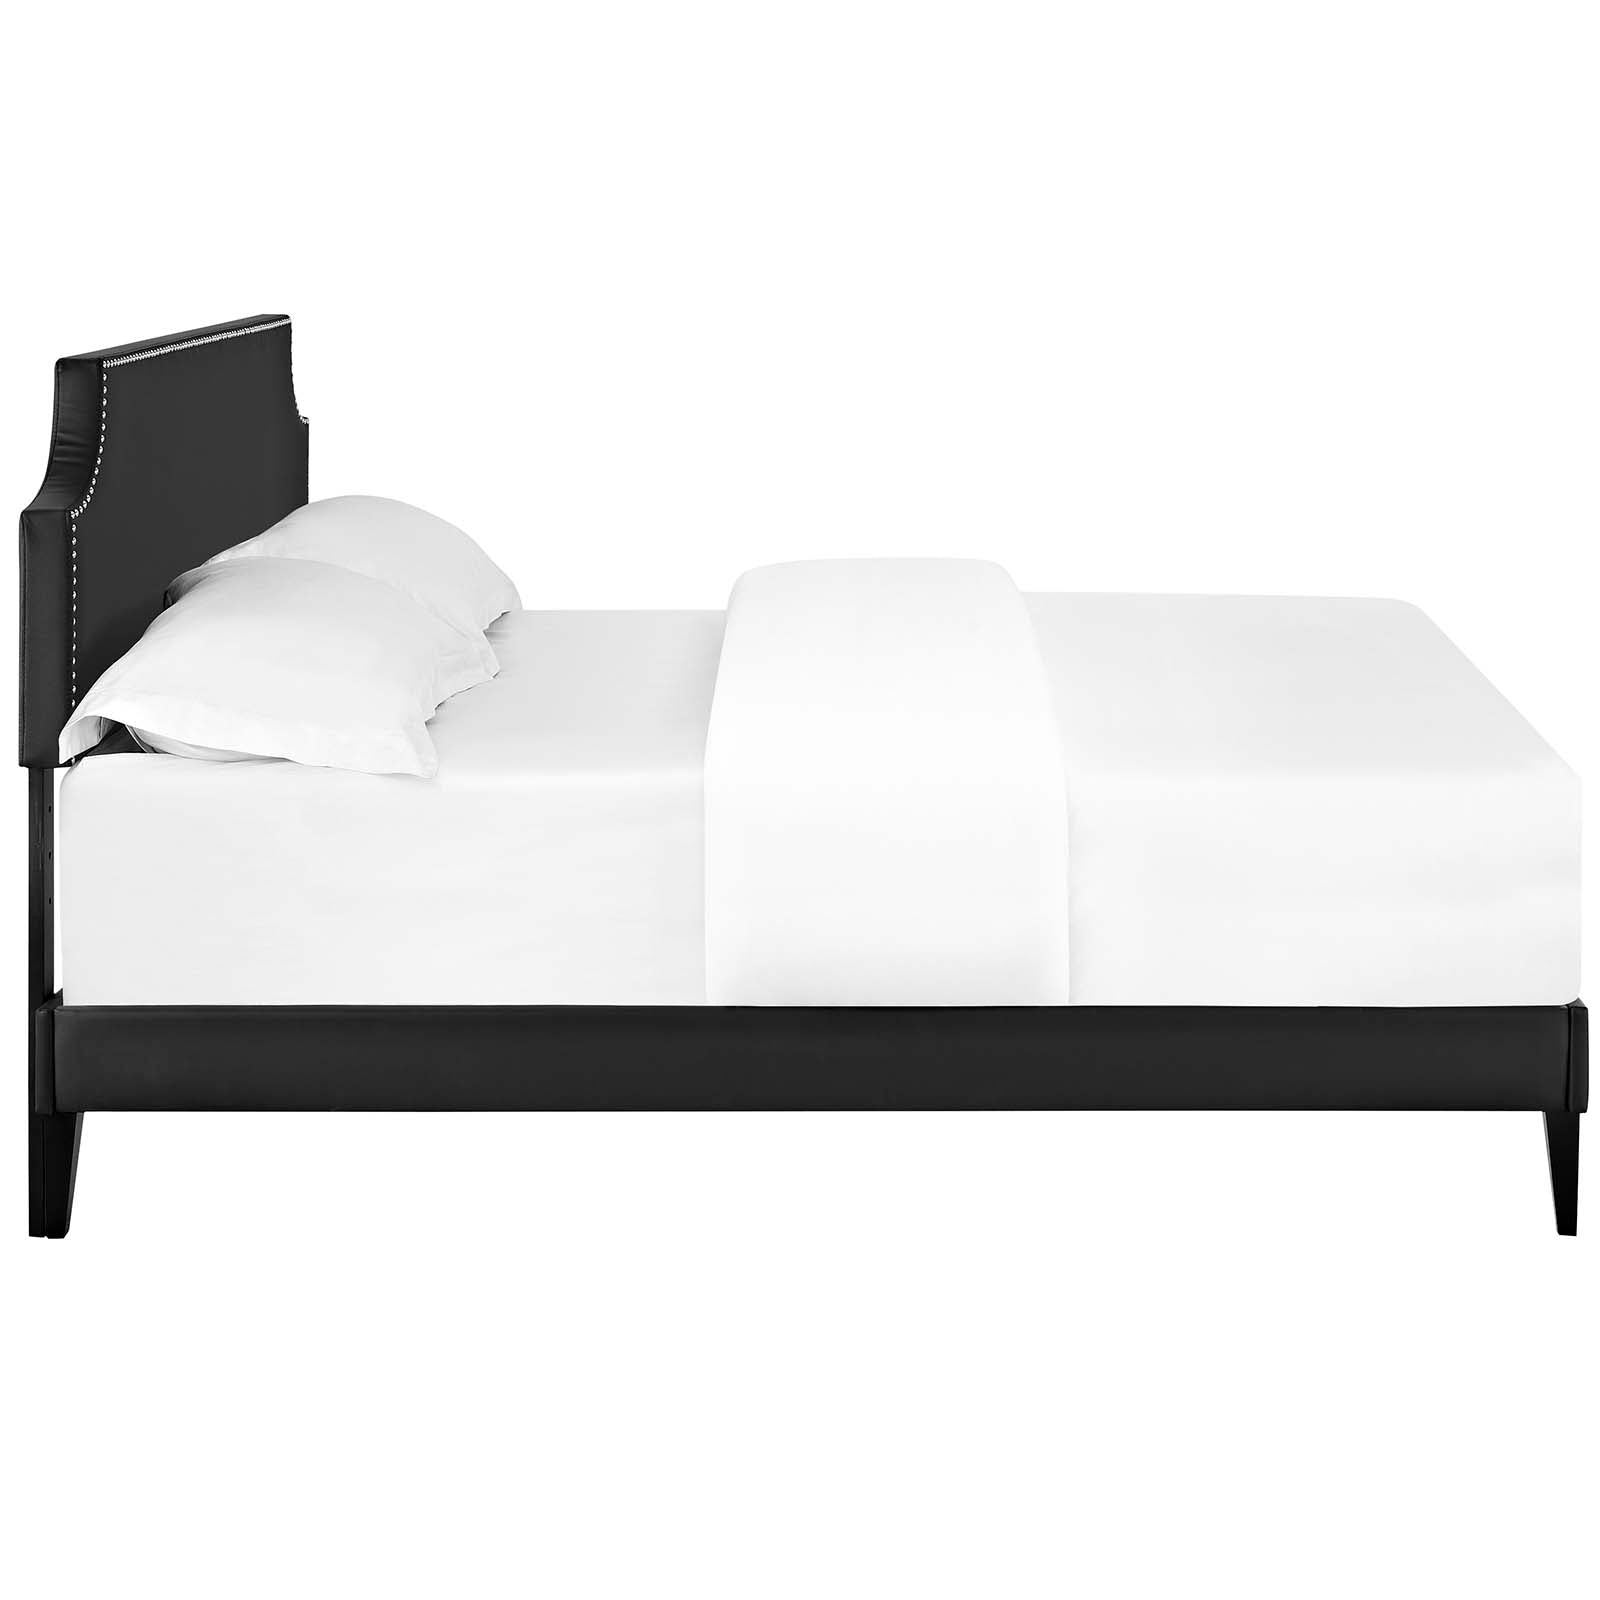 Modway Beds - Corene Full Vinyl Platform Bed with Squared Tapered Legs Black